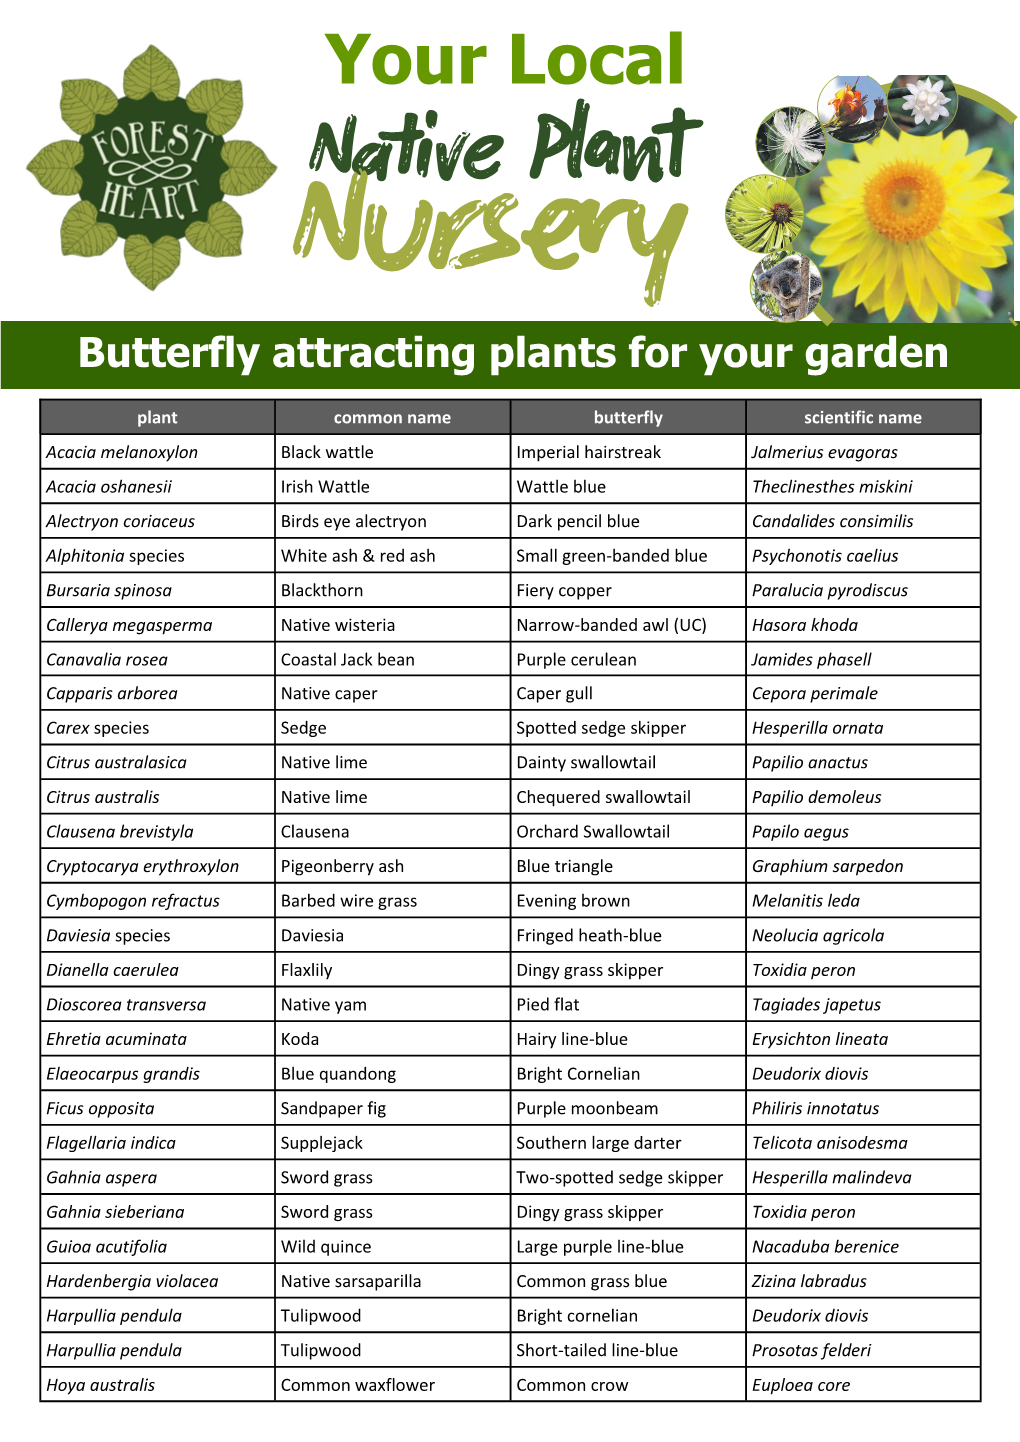 Your Local Butterfly Attracting Plants for Your Garden